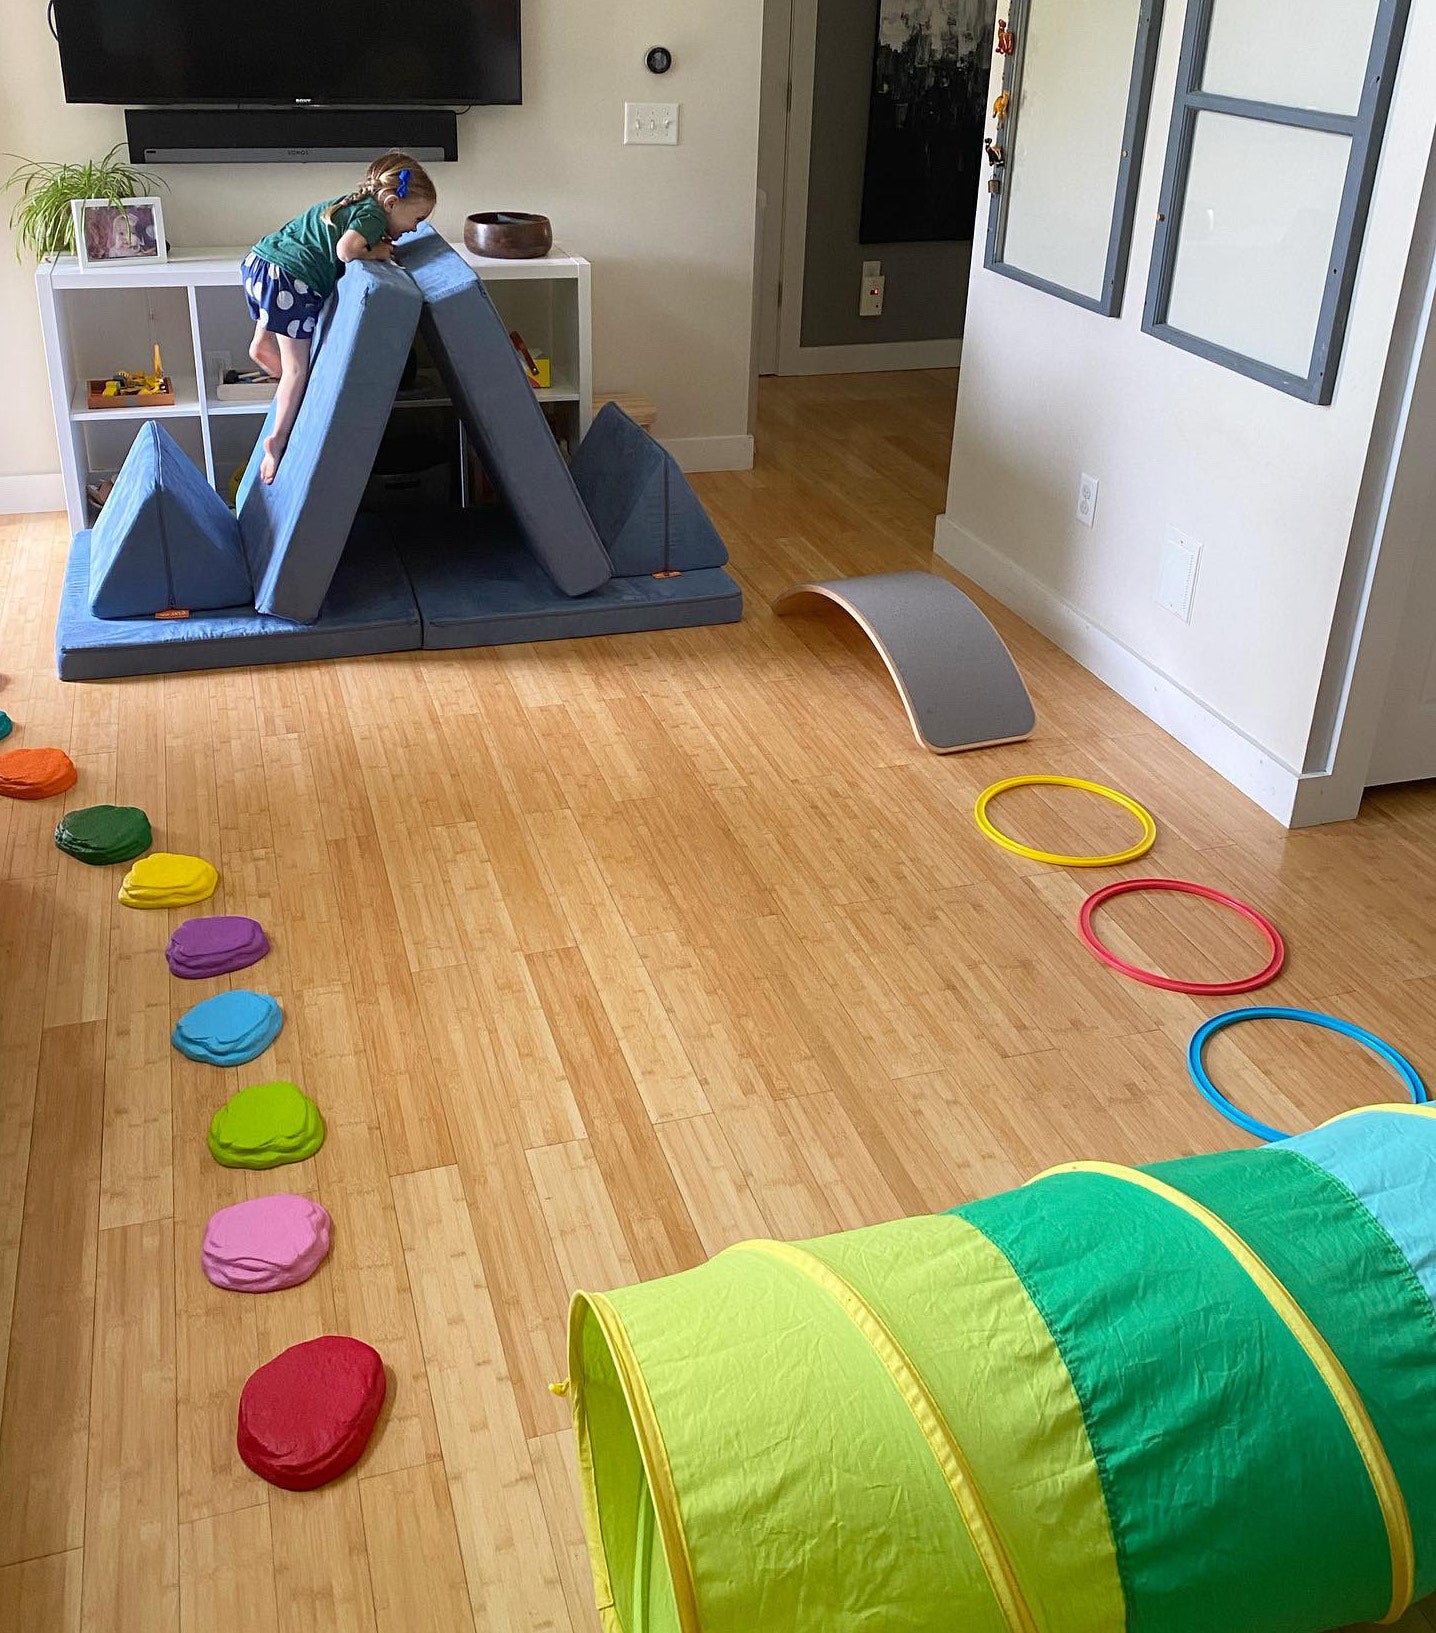 Child climbing up a Nugget base folded in two like a mountain peak, with a tunnel, stepping stones, and hula hoops set up around as an obstacle course